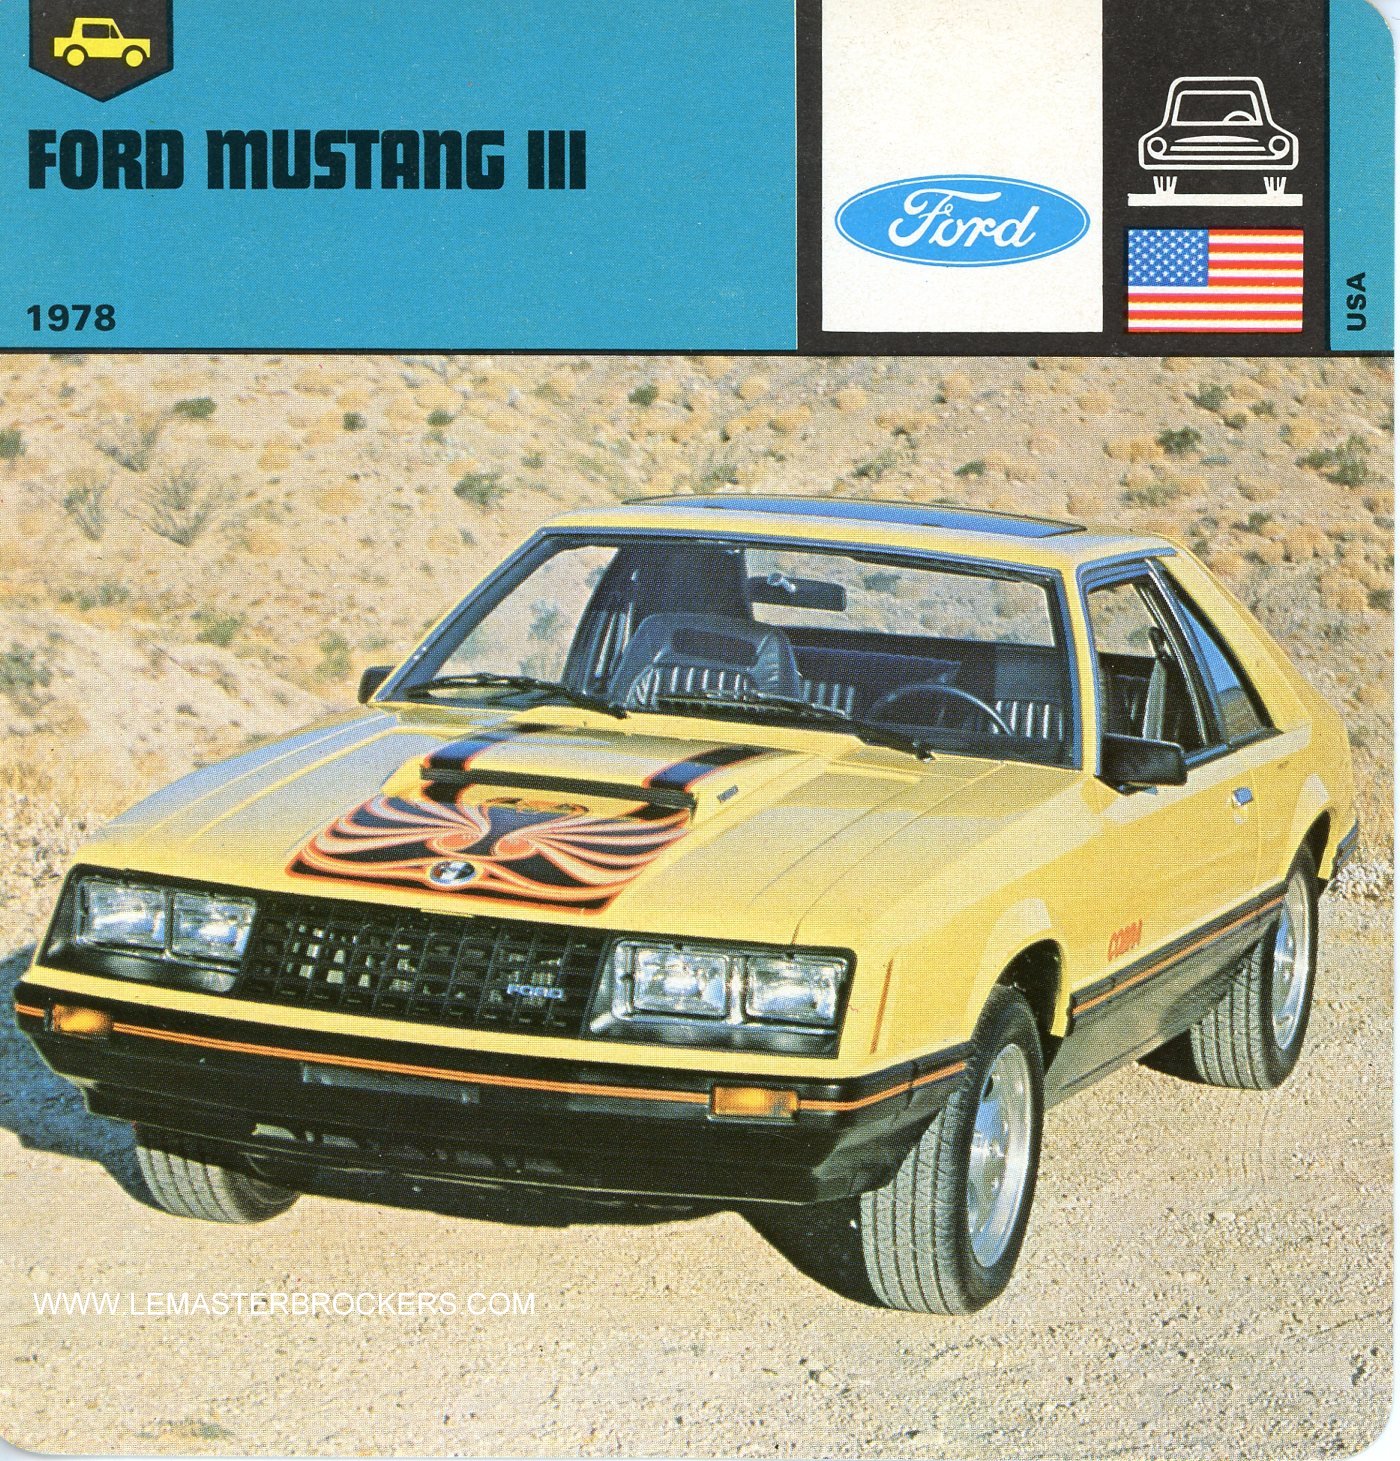 FICHE AUTO FORD MUSTANG-CARS-CARD-LEMASTERBROCKERS